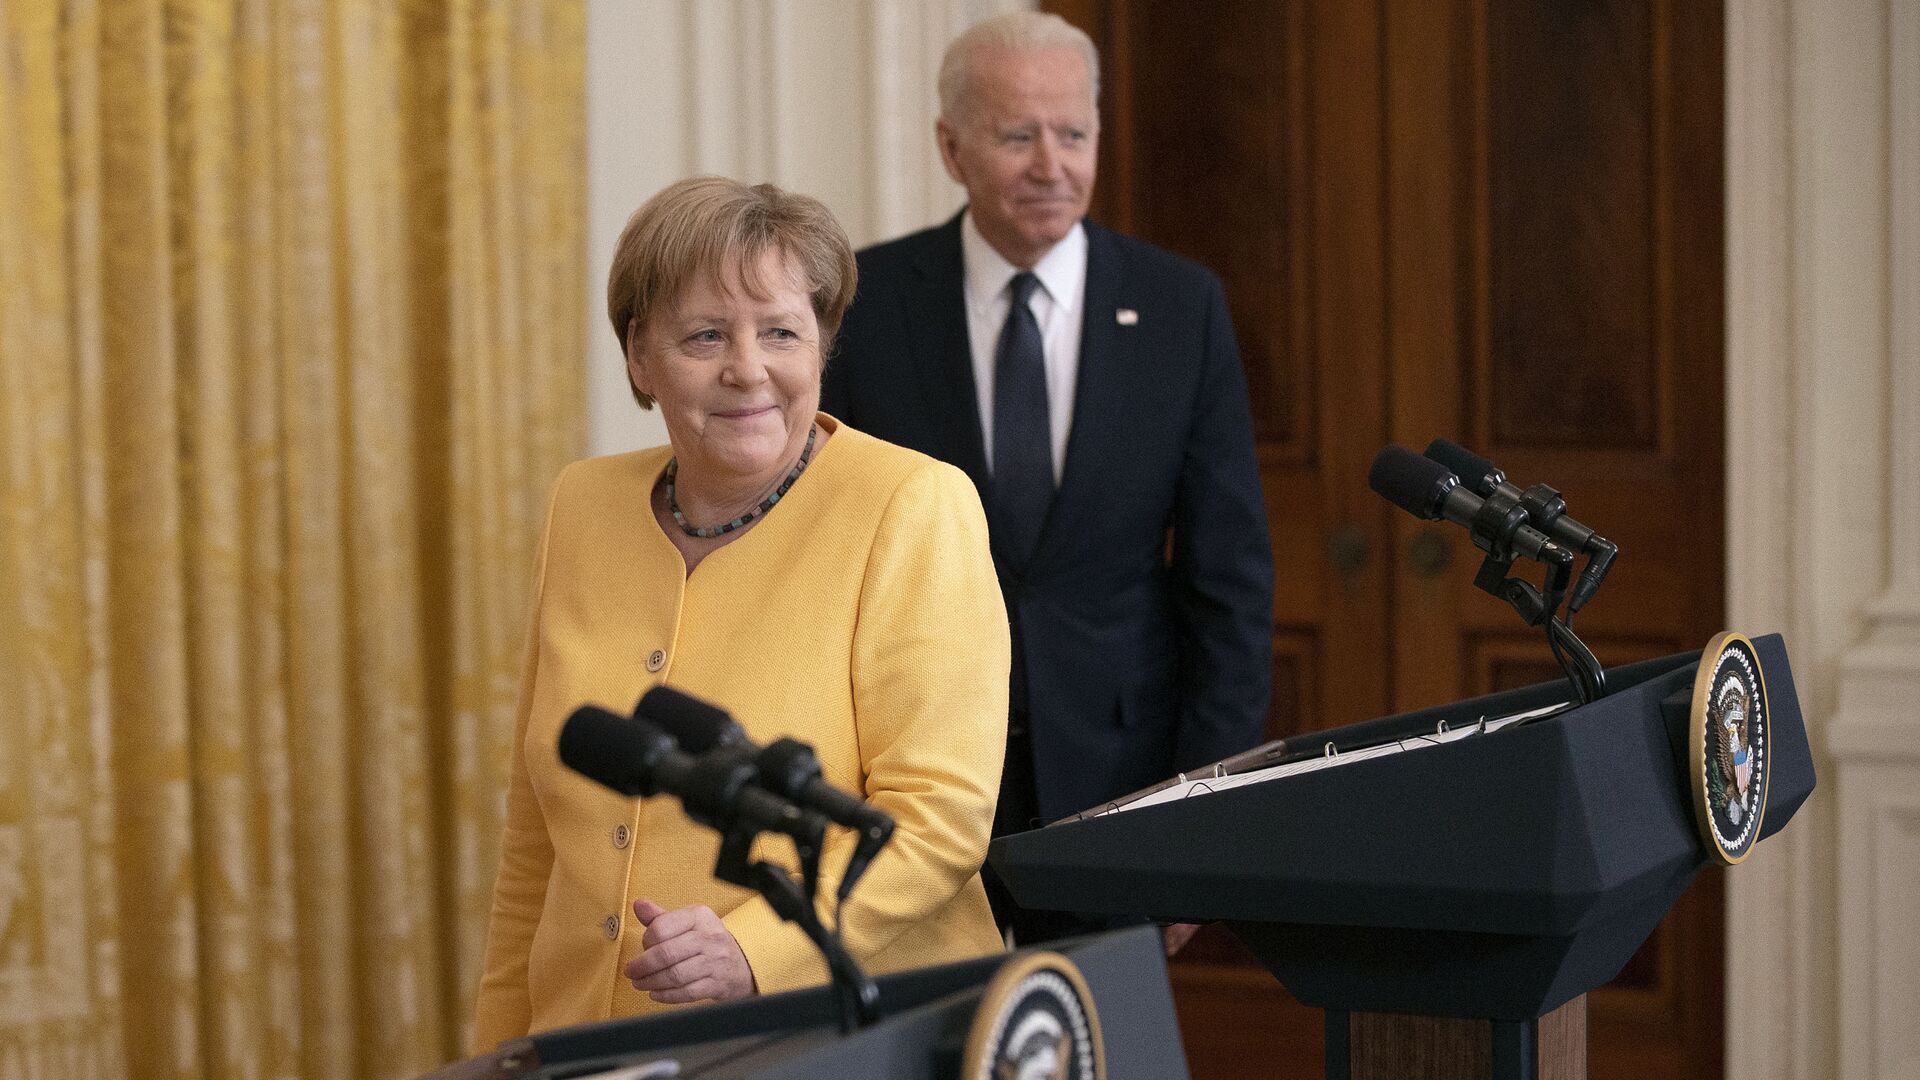 German Chancellor Angela Merkel (L) and U.S. President Joe Biden take the stage for a joint news conference in the East Room of the White House on July 15, 2021 in Washington, DC. During what is likely her last official visit to Washington, Merkel and Biden discussed their shared priorities on climate change and defense; and Biden voiced his concerns about the Nord Stream 2 Russian natural gas pipeline. - Sputnik International, 1920, 16.07.2021